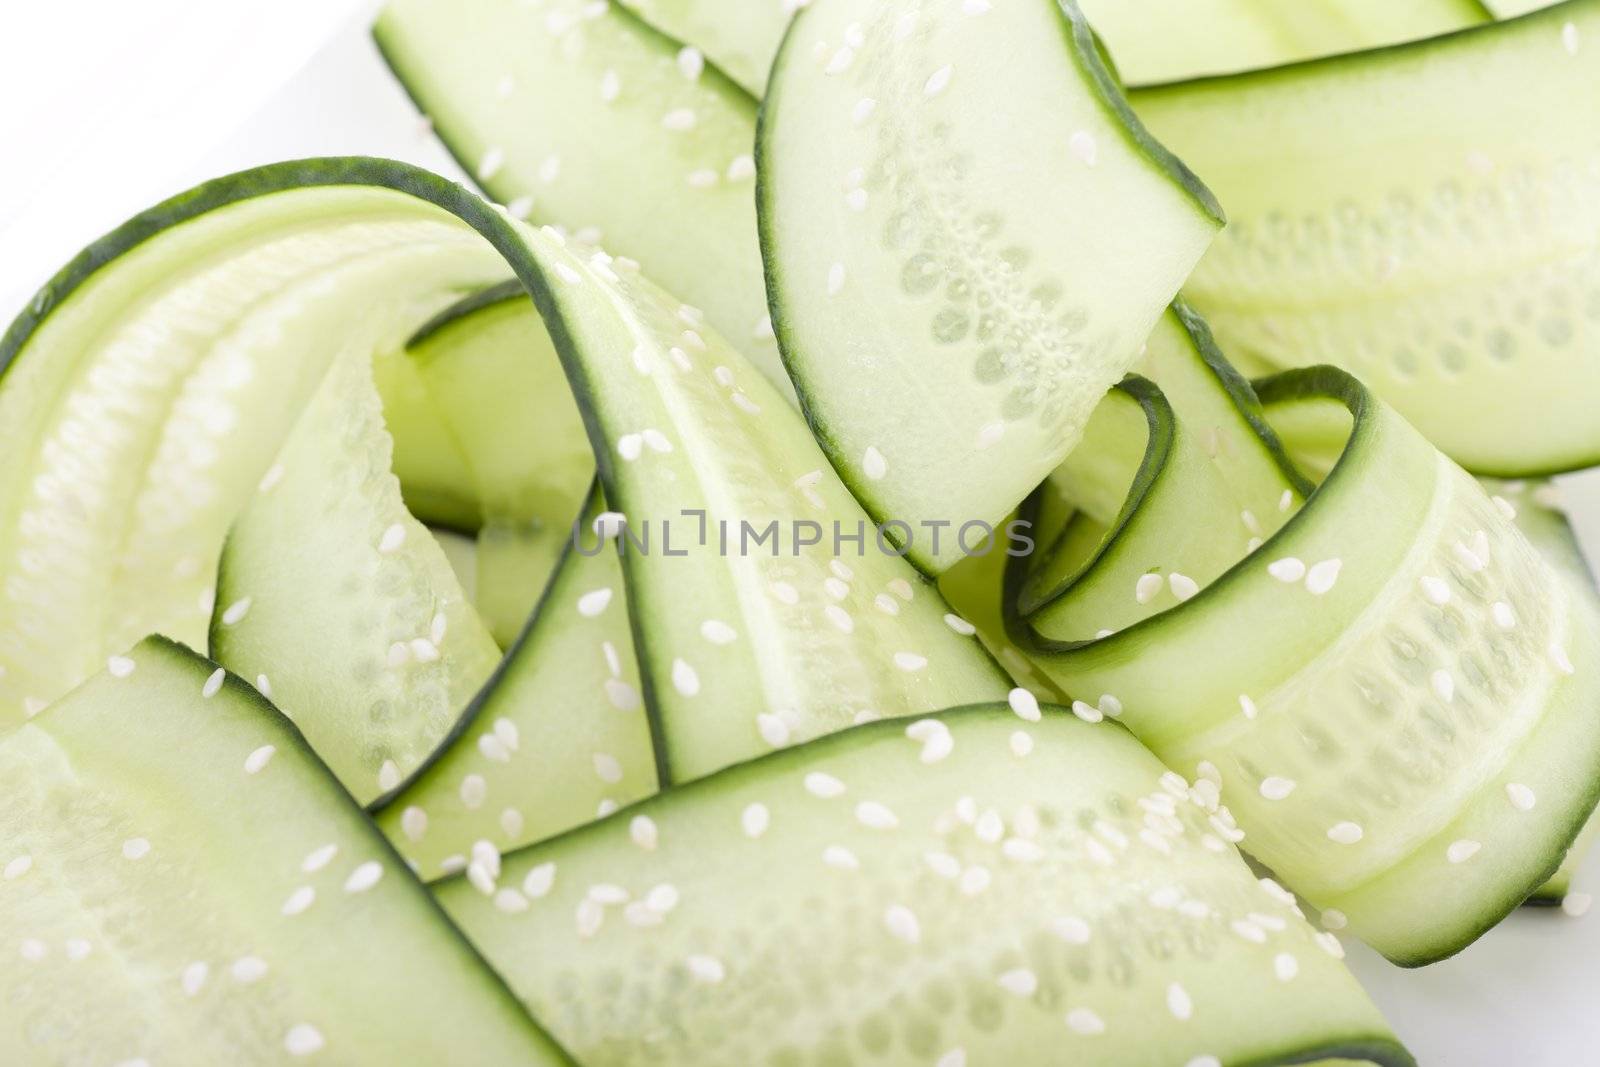 Japanese cucumber salad with rice vinegar and sesame seeds.